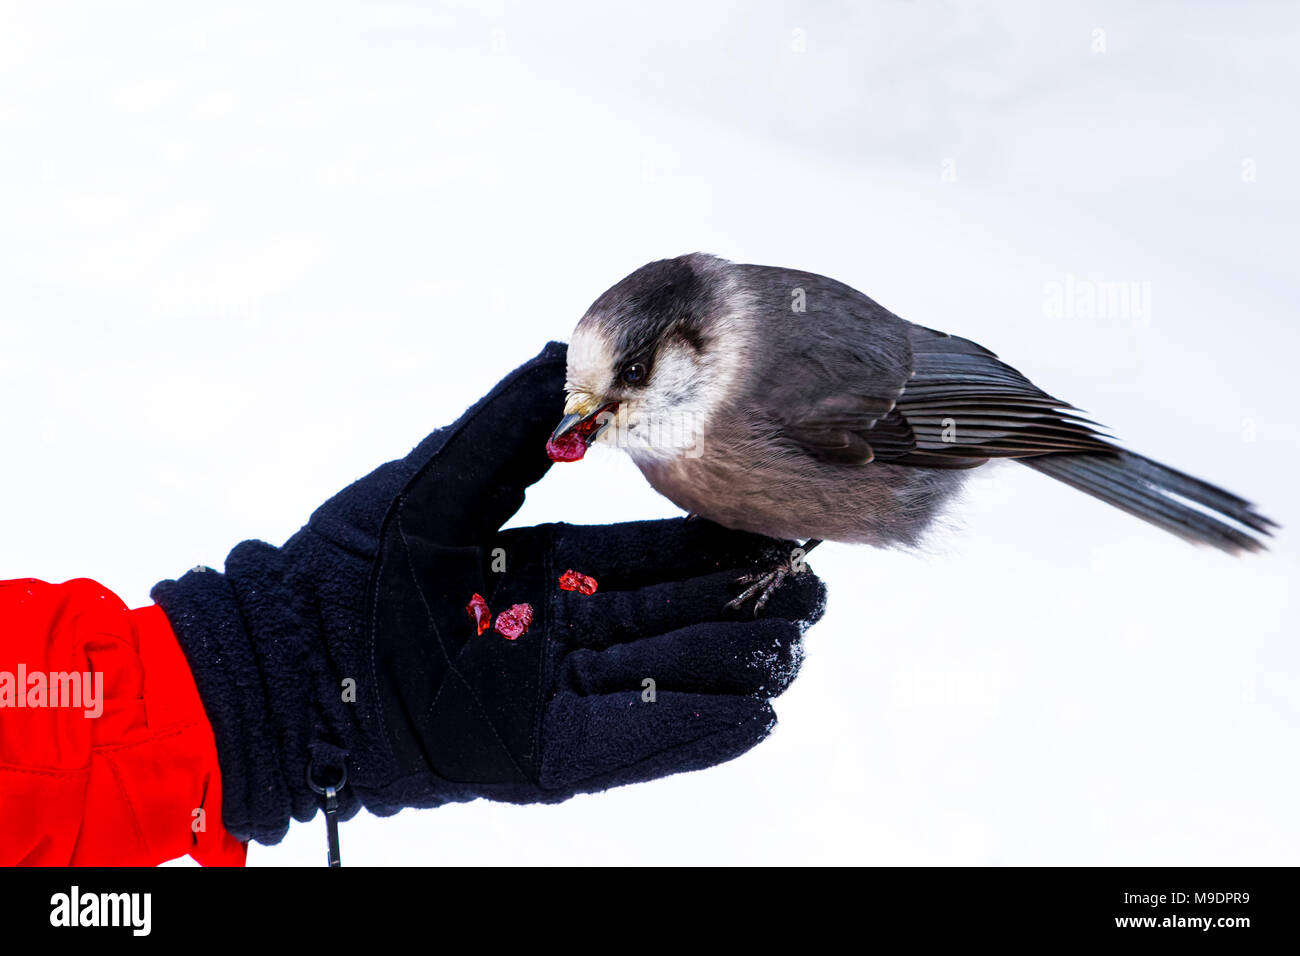 43,118.09168 close-up of Gray Jay, Canada jay eating cranberries out of a woman’s gloved hand; while she feeds the bird out of her hand Stock Photo